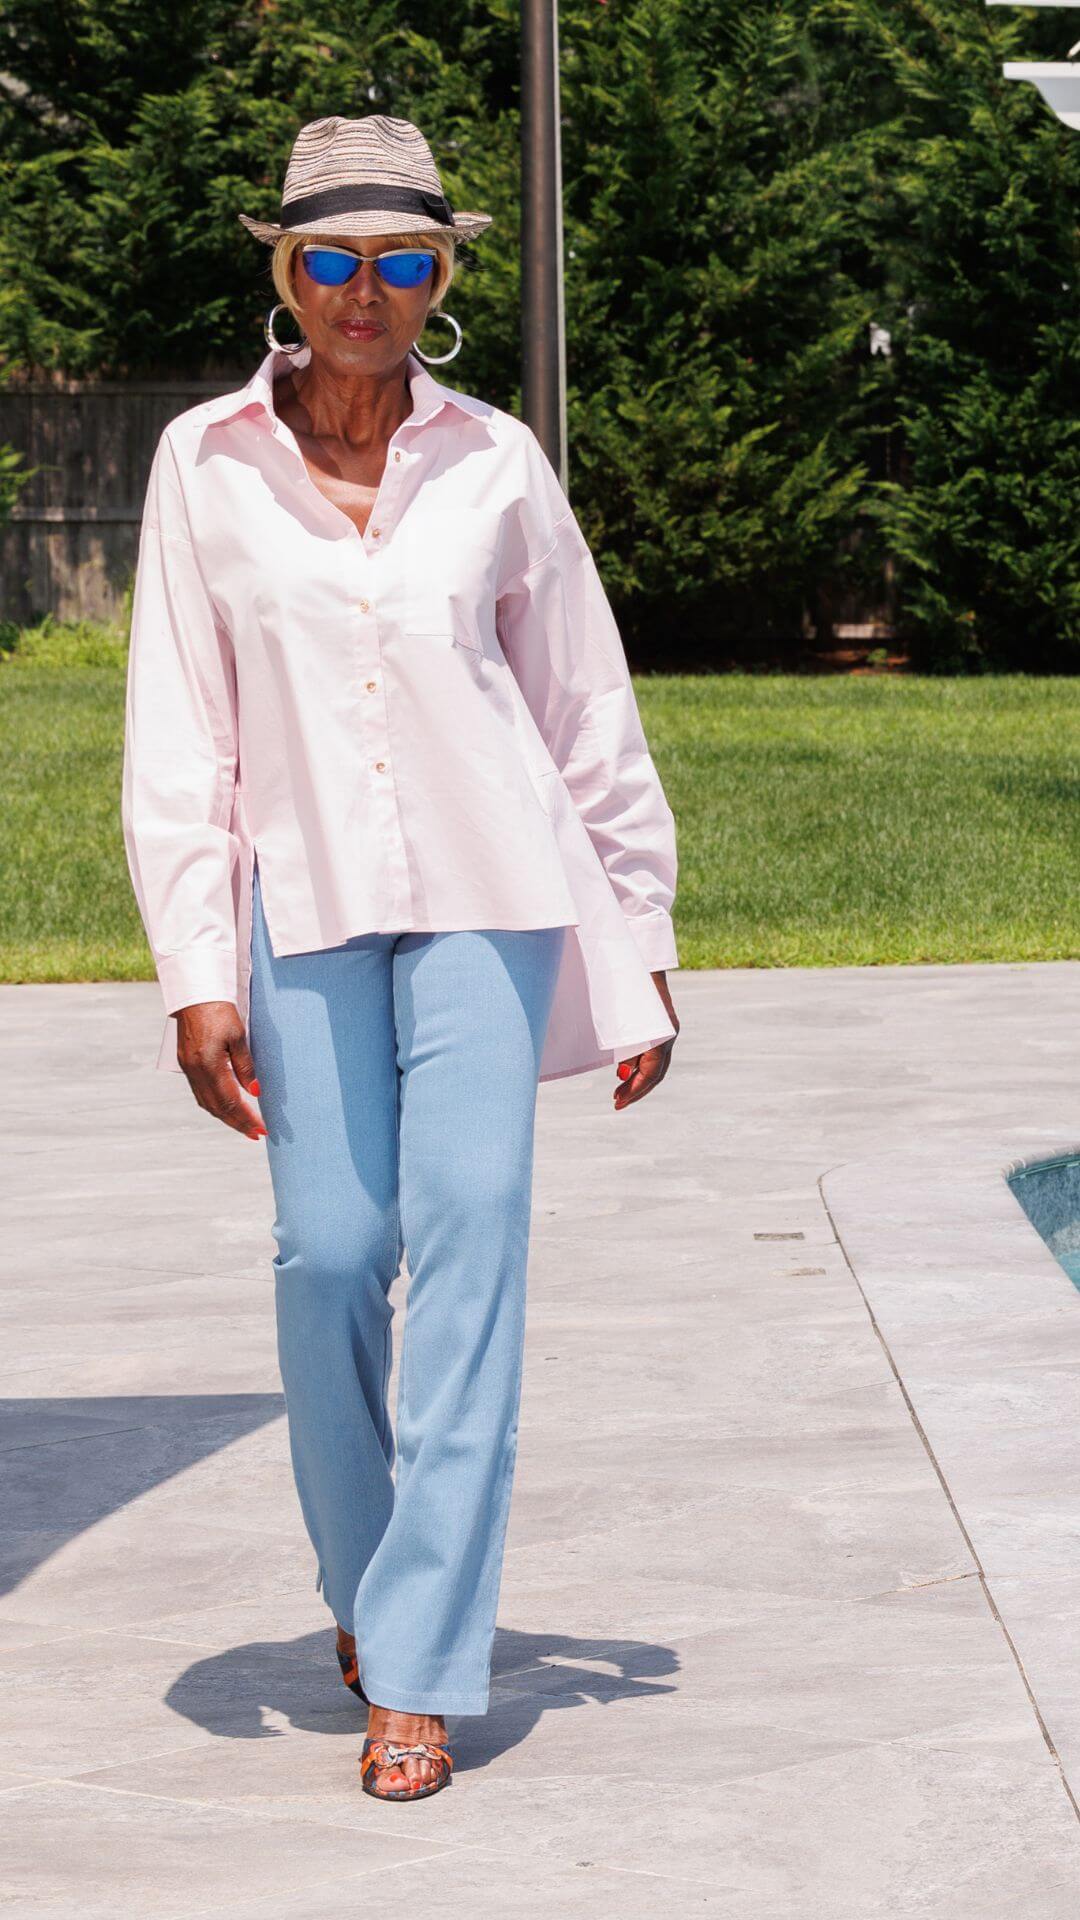 Women with Control® Elite Prime Stretch Denim Flare Pant in Stone Wash paired with the Attitudes By Renée® Flyaway Button Front Shirt in Pink Peony